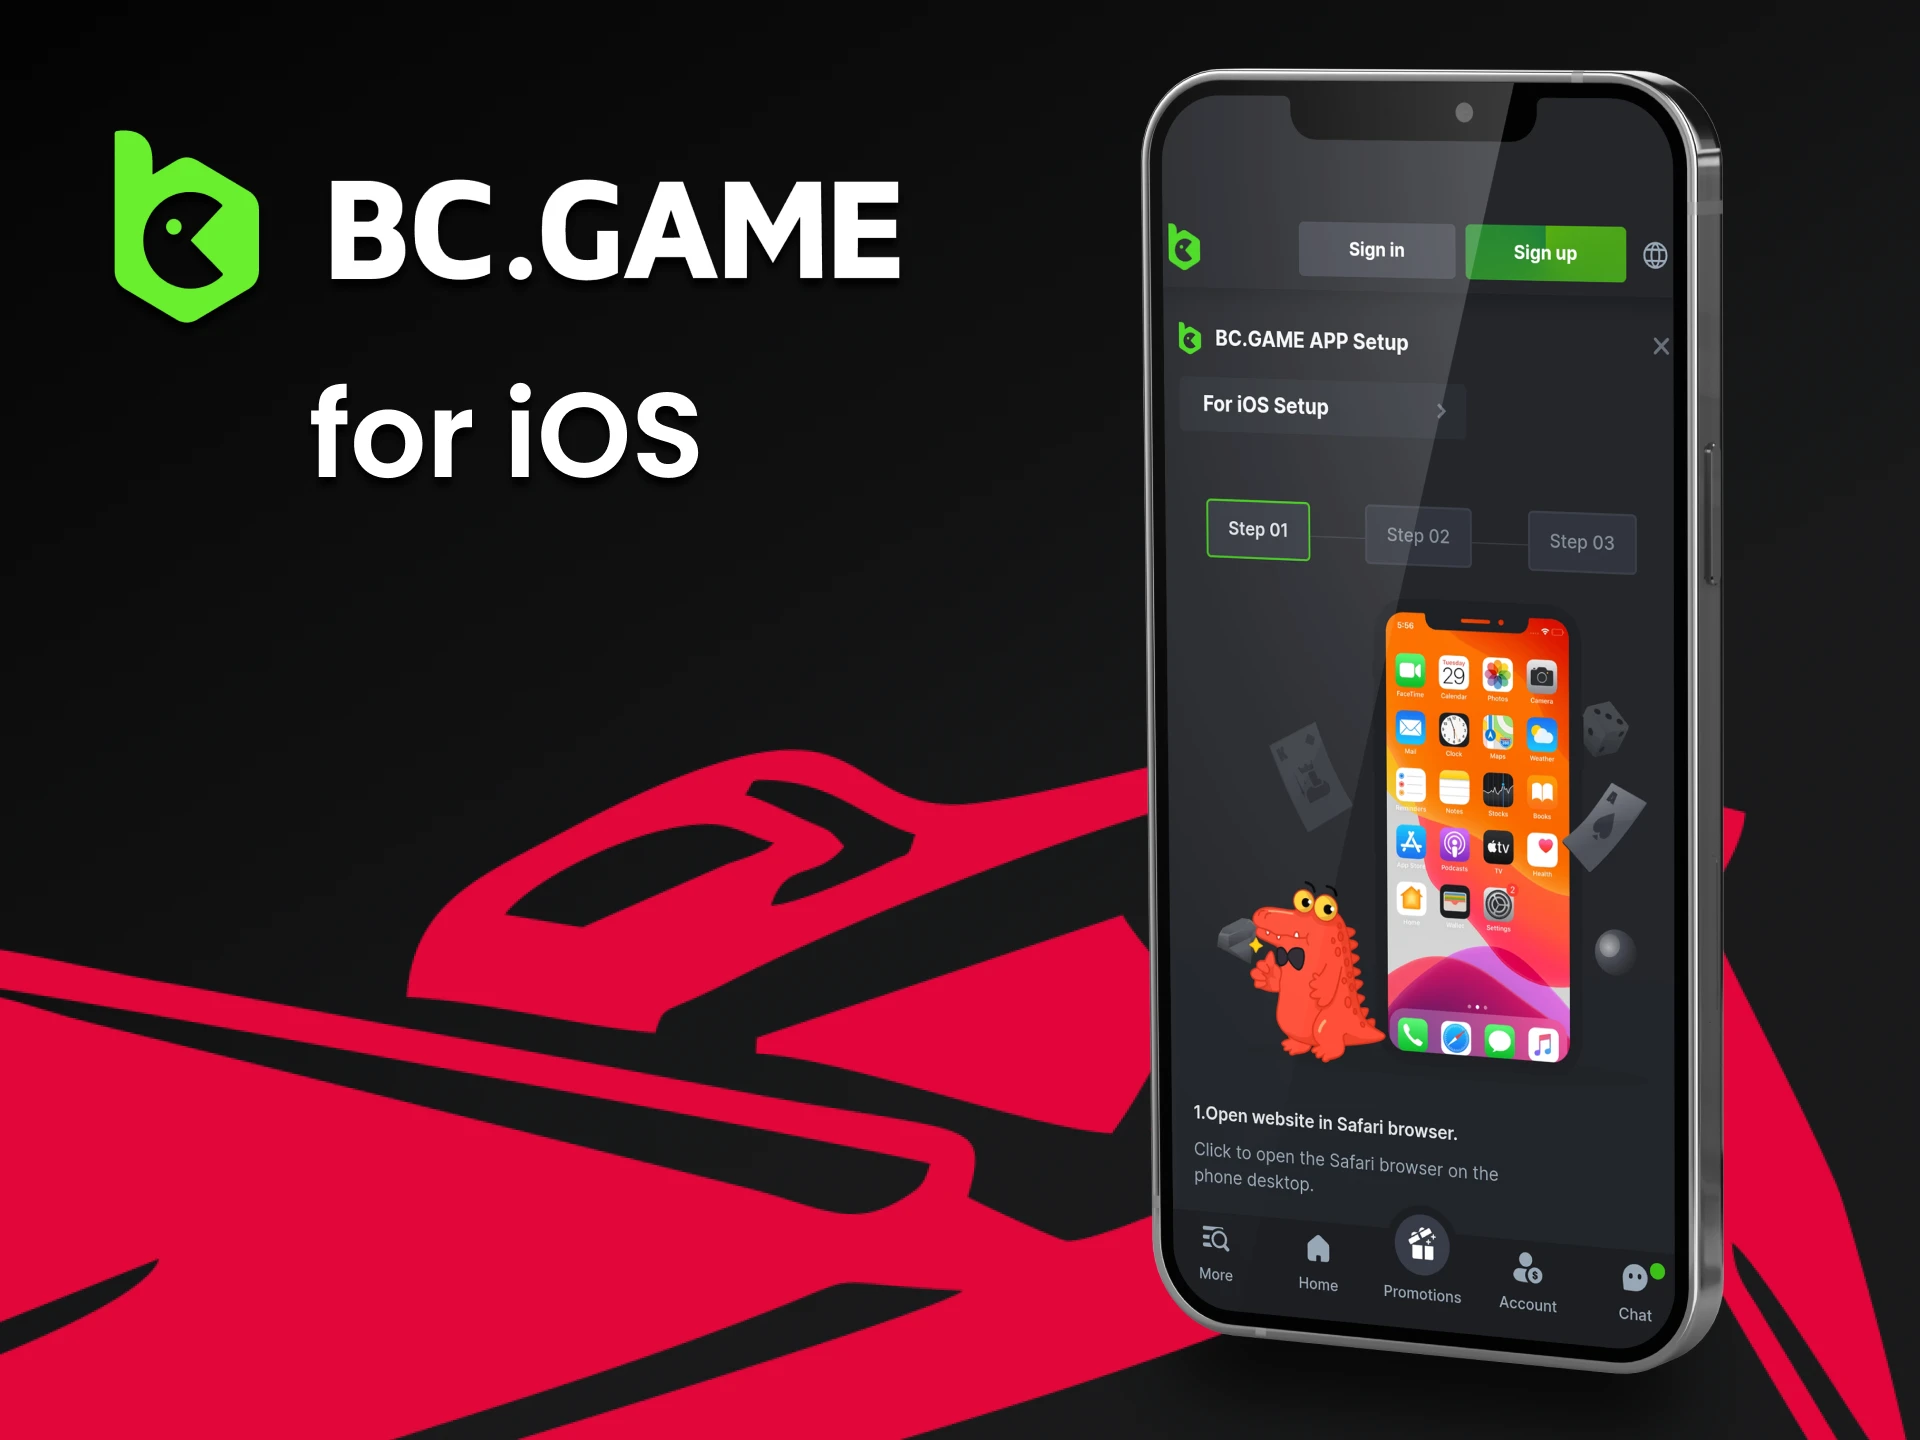 Download the BCGame app to play Aviator on iOS.